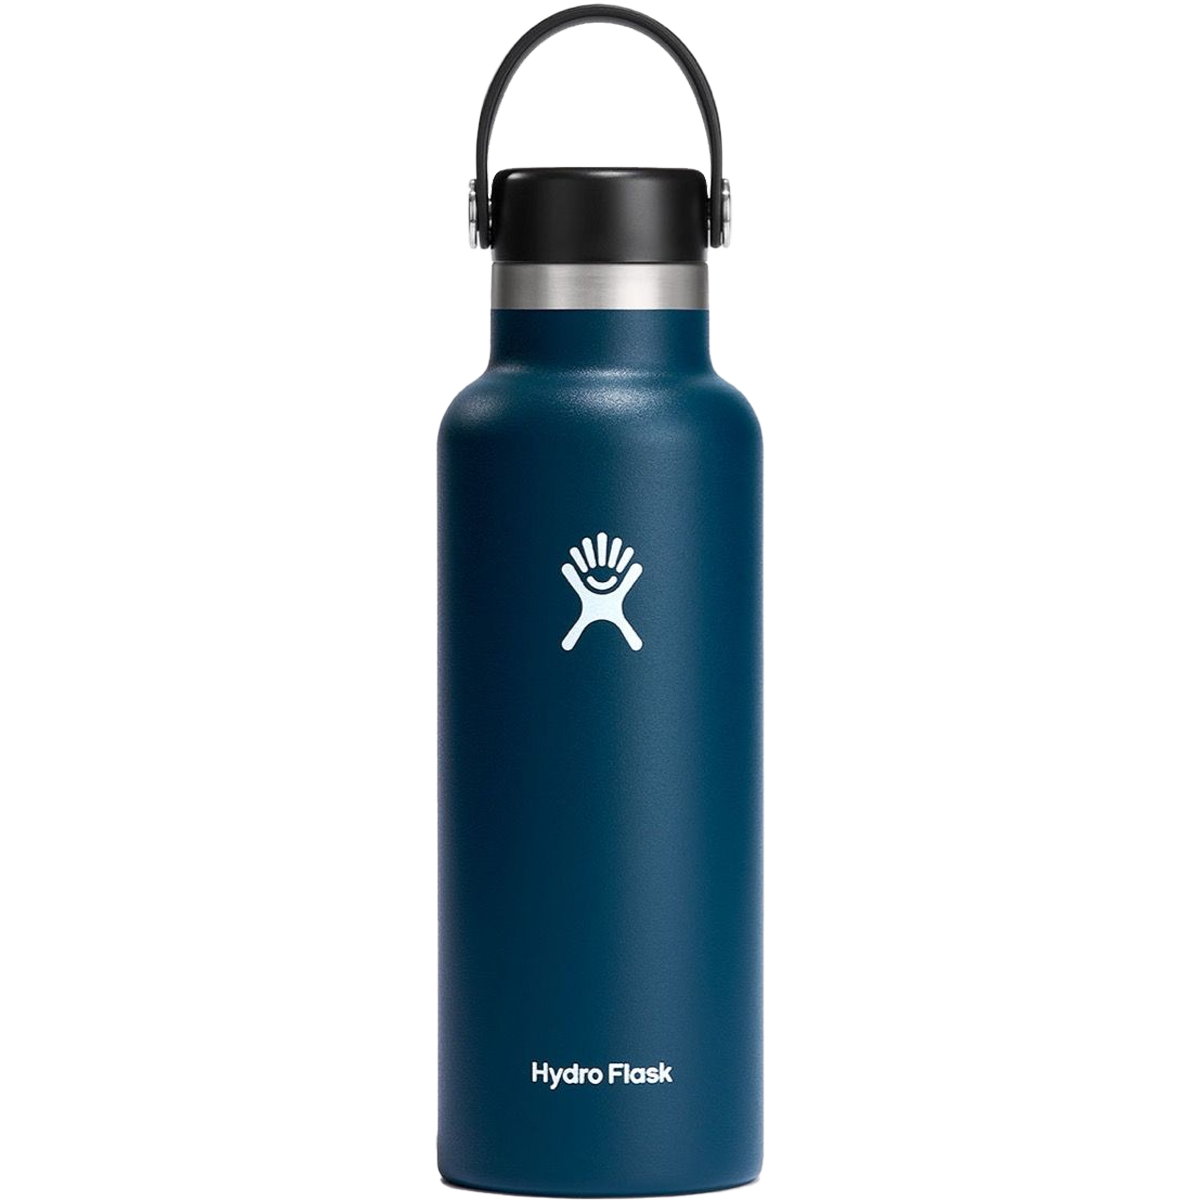 Hydro Flask Food Flask 18 oz Review - The Good Ride